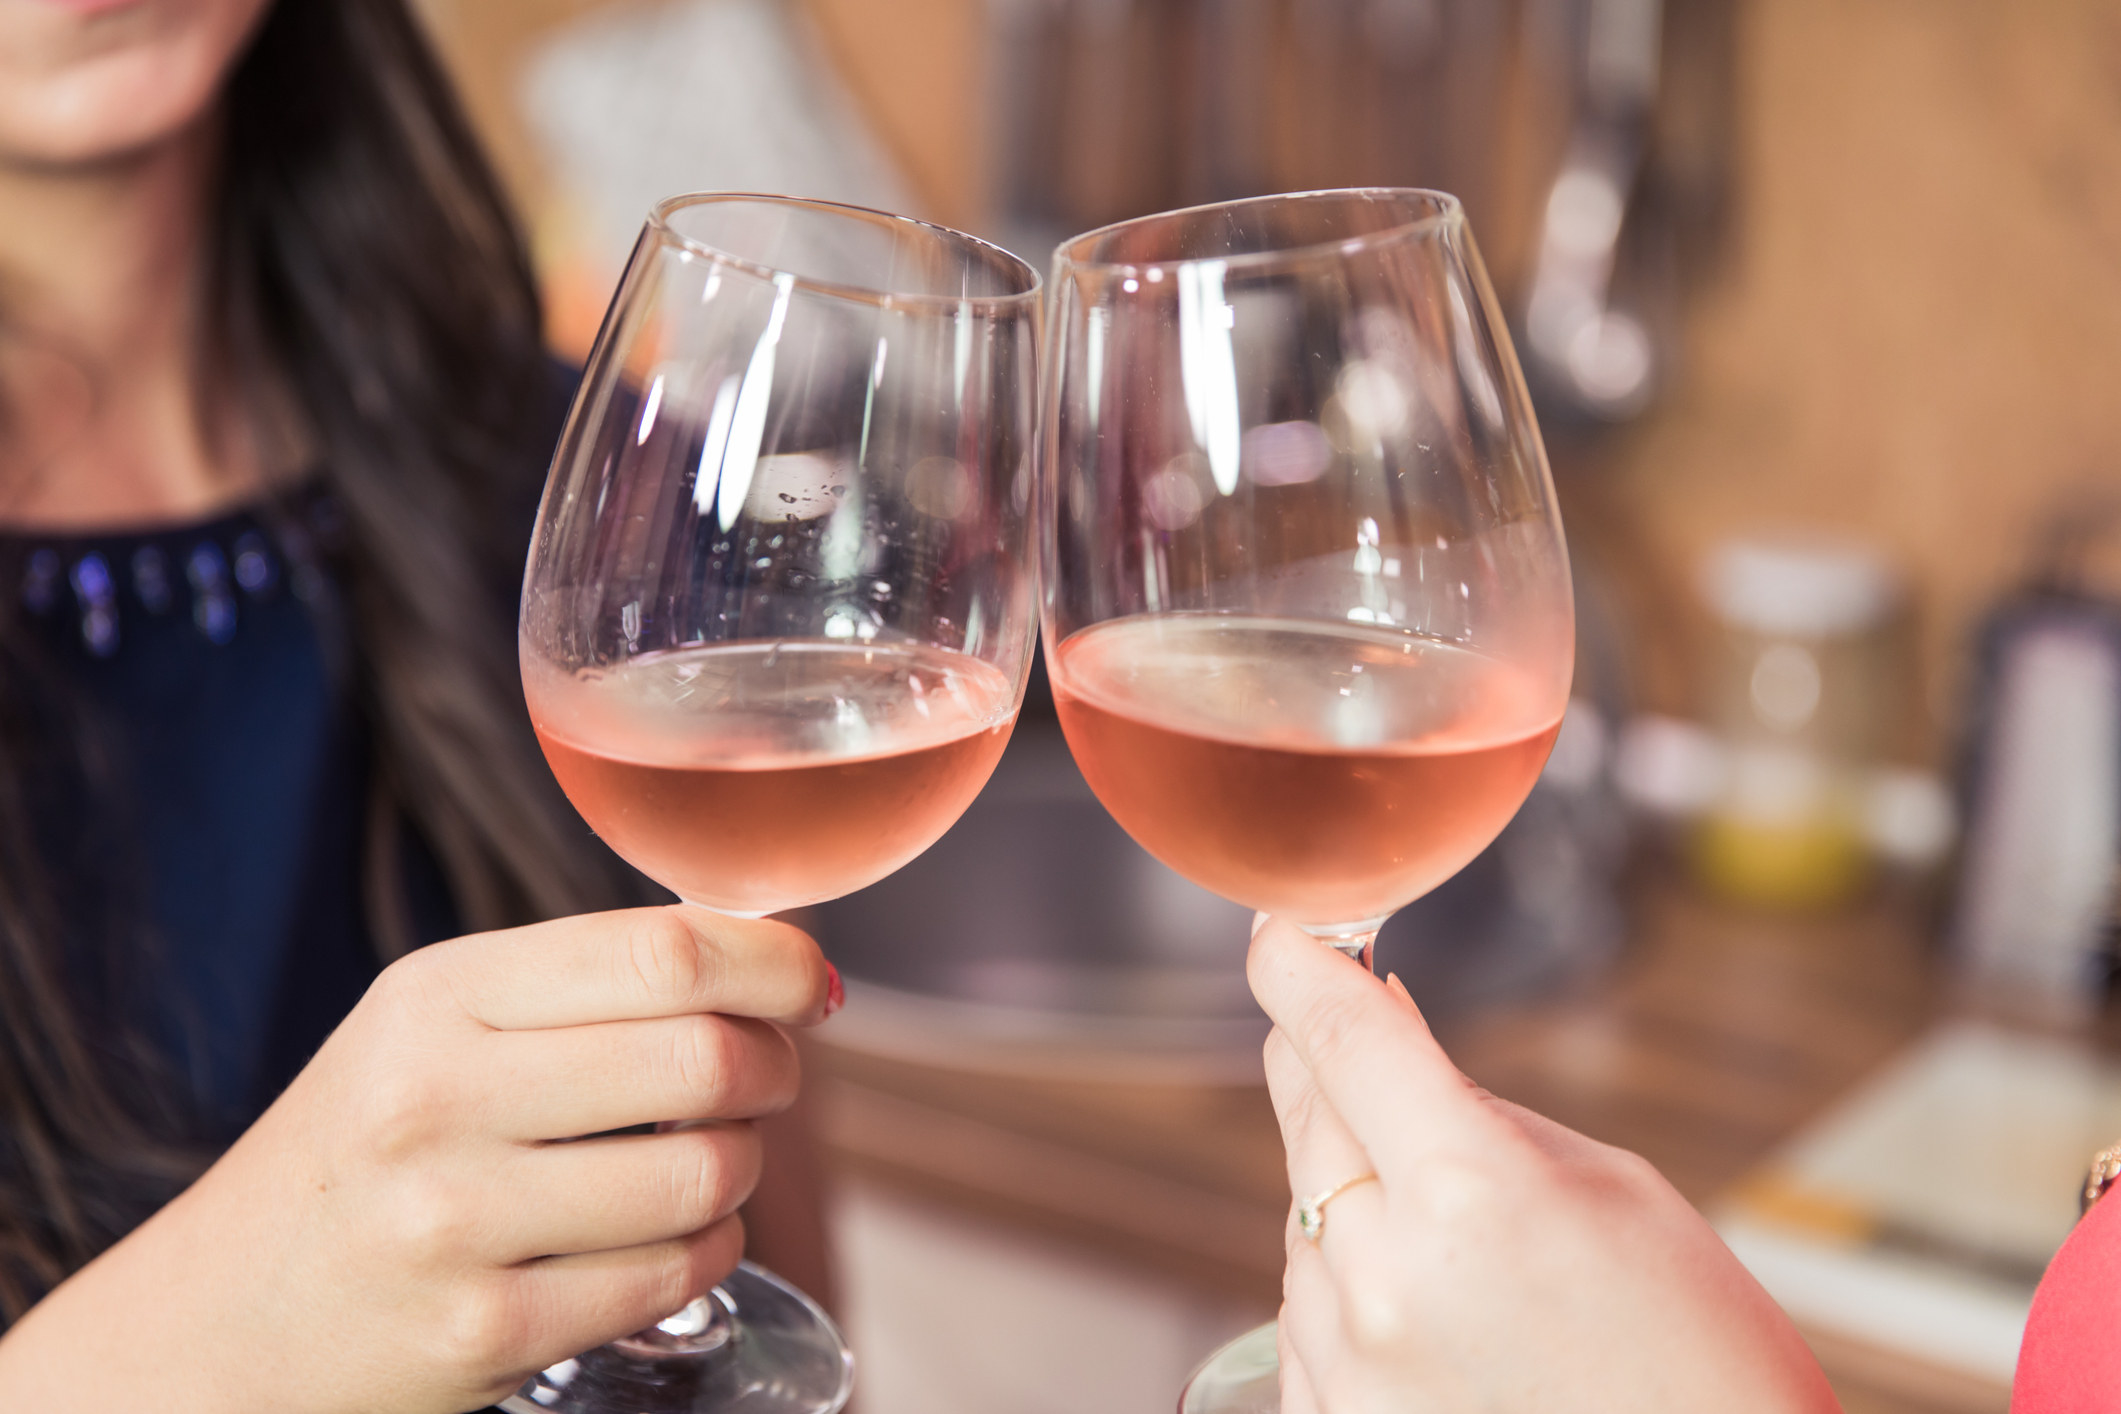 Two people clinking wine glasses full of rosé